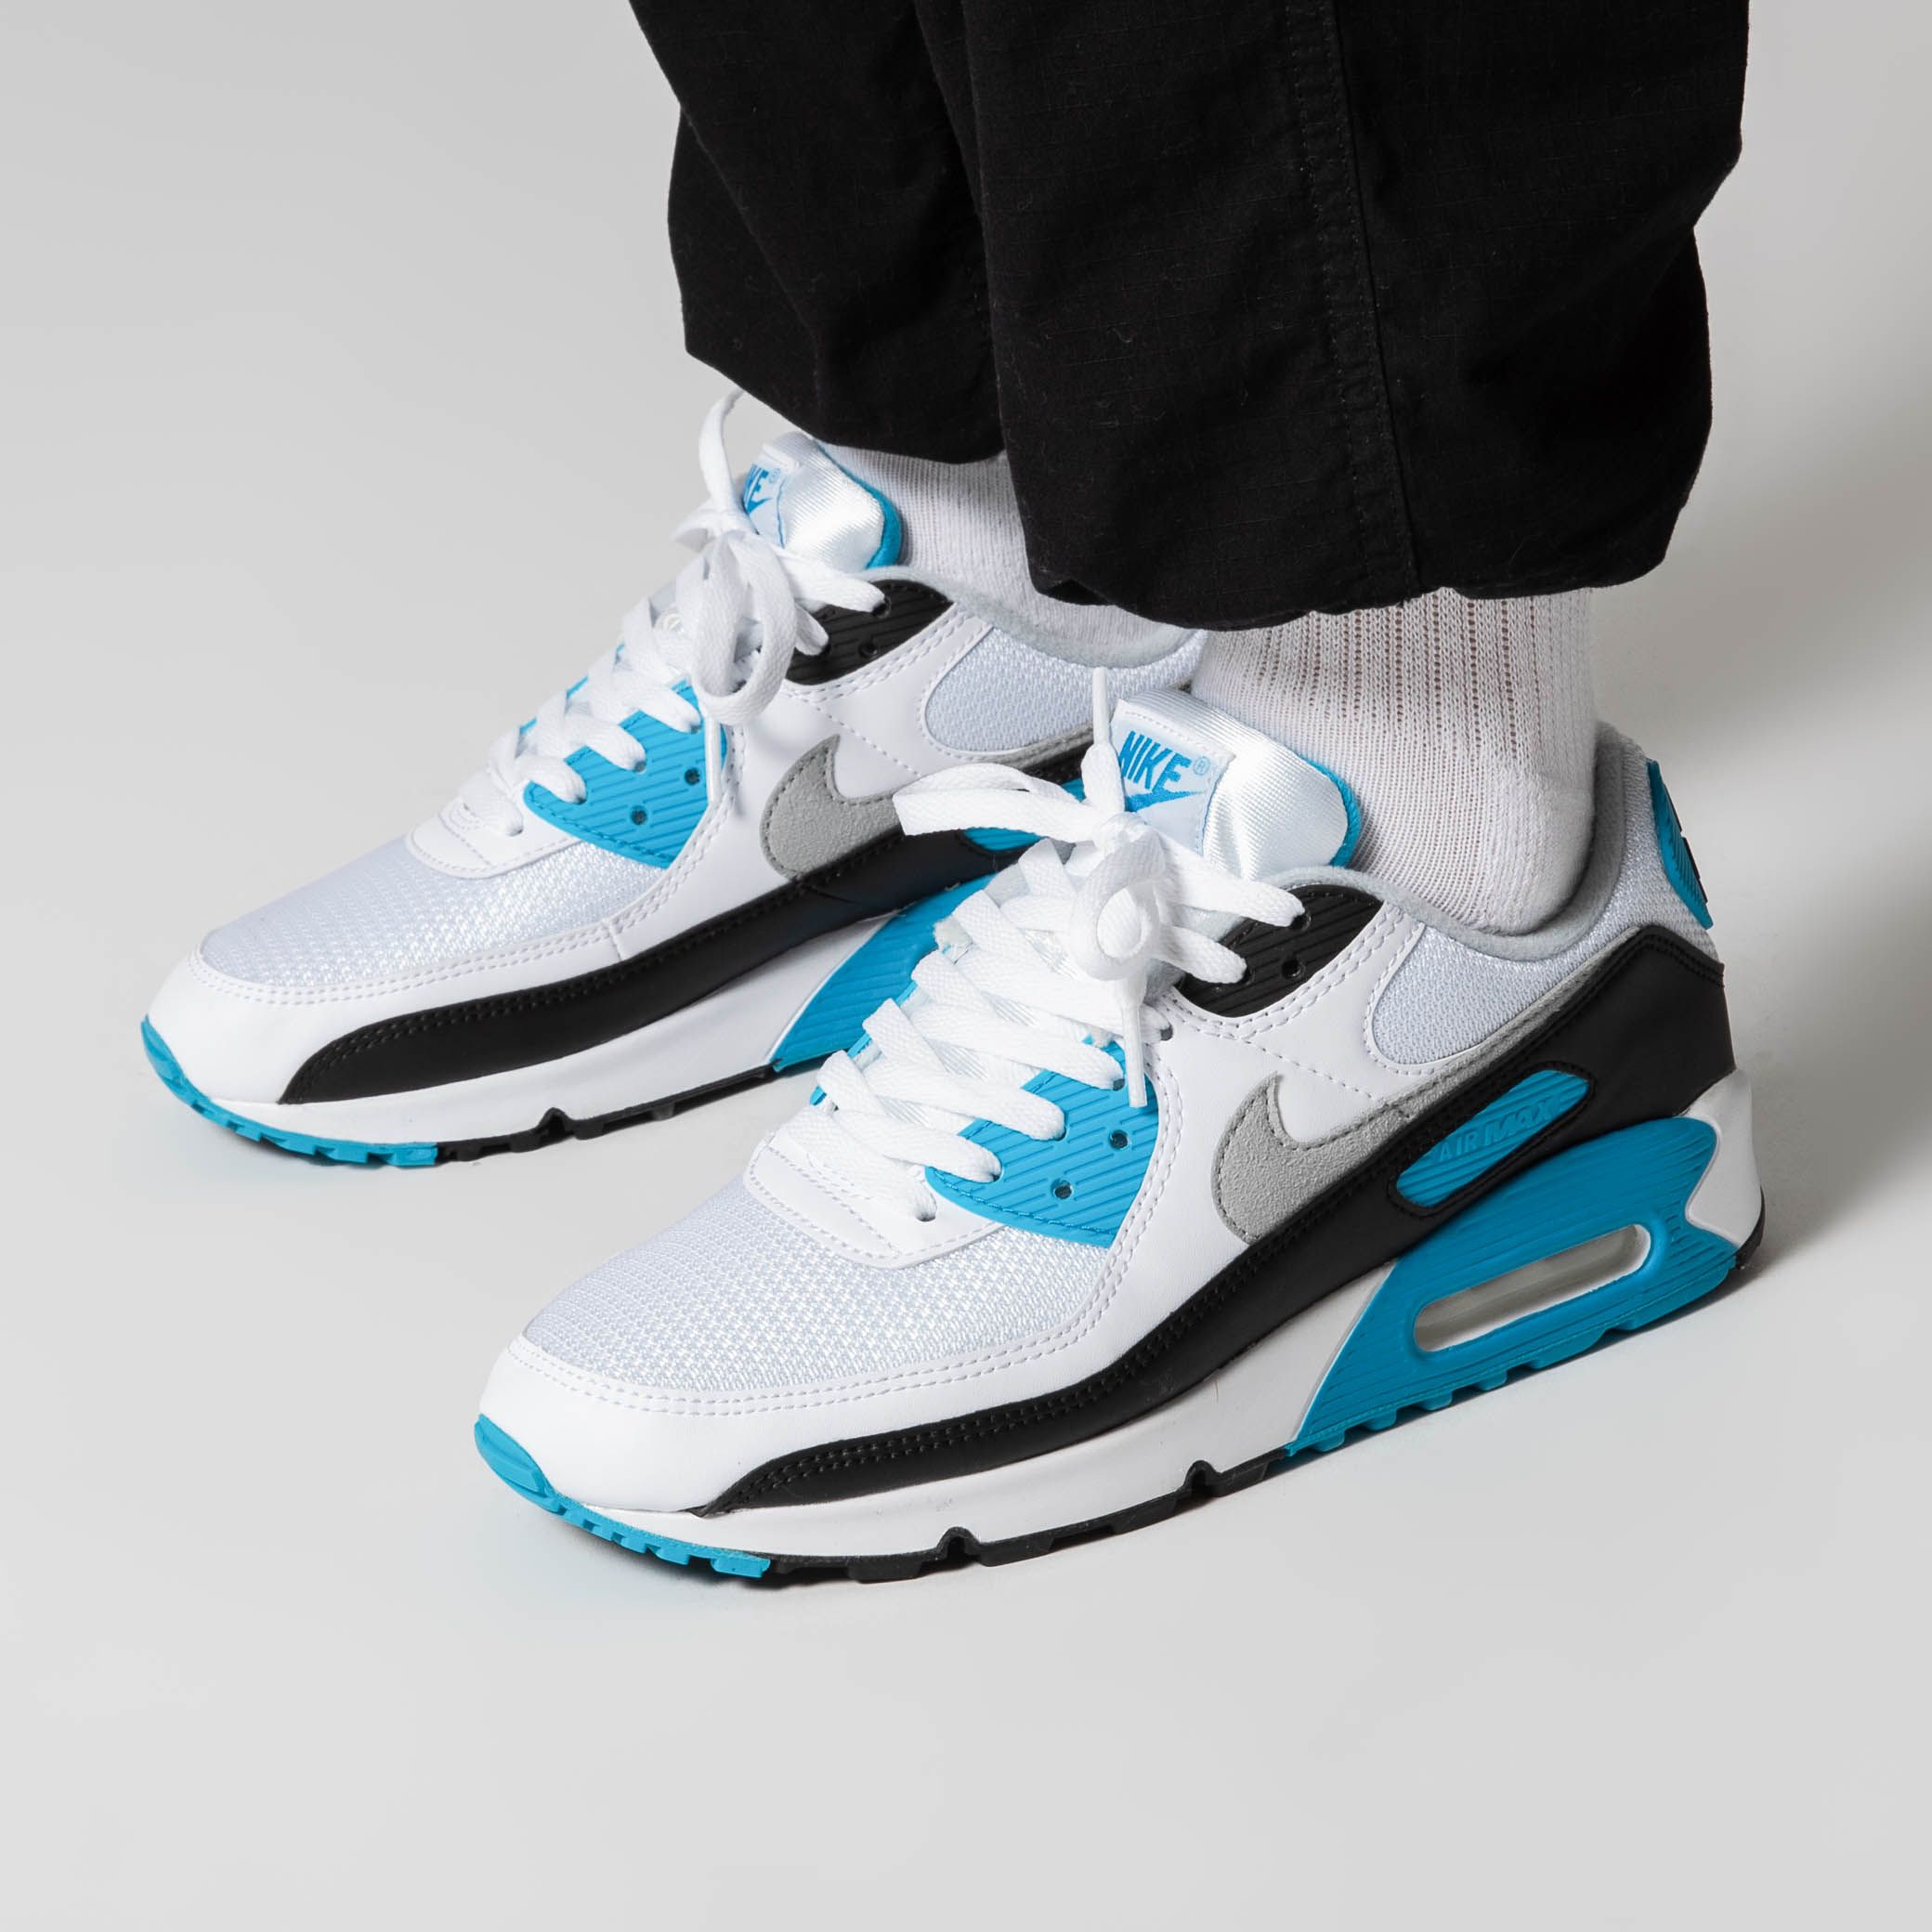 Titolo on Twitter: "to celebrate the 30th Anniversary, the Nike Air Max 90 returns in OG colorway "Laser Blue" and with its name AIR MAX III ⚪️🔵 Saturday, 1st August online